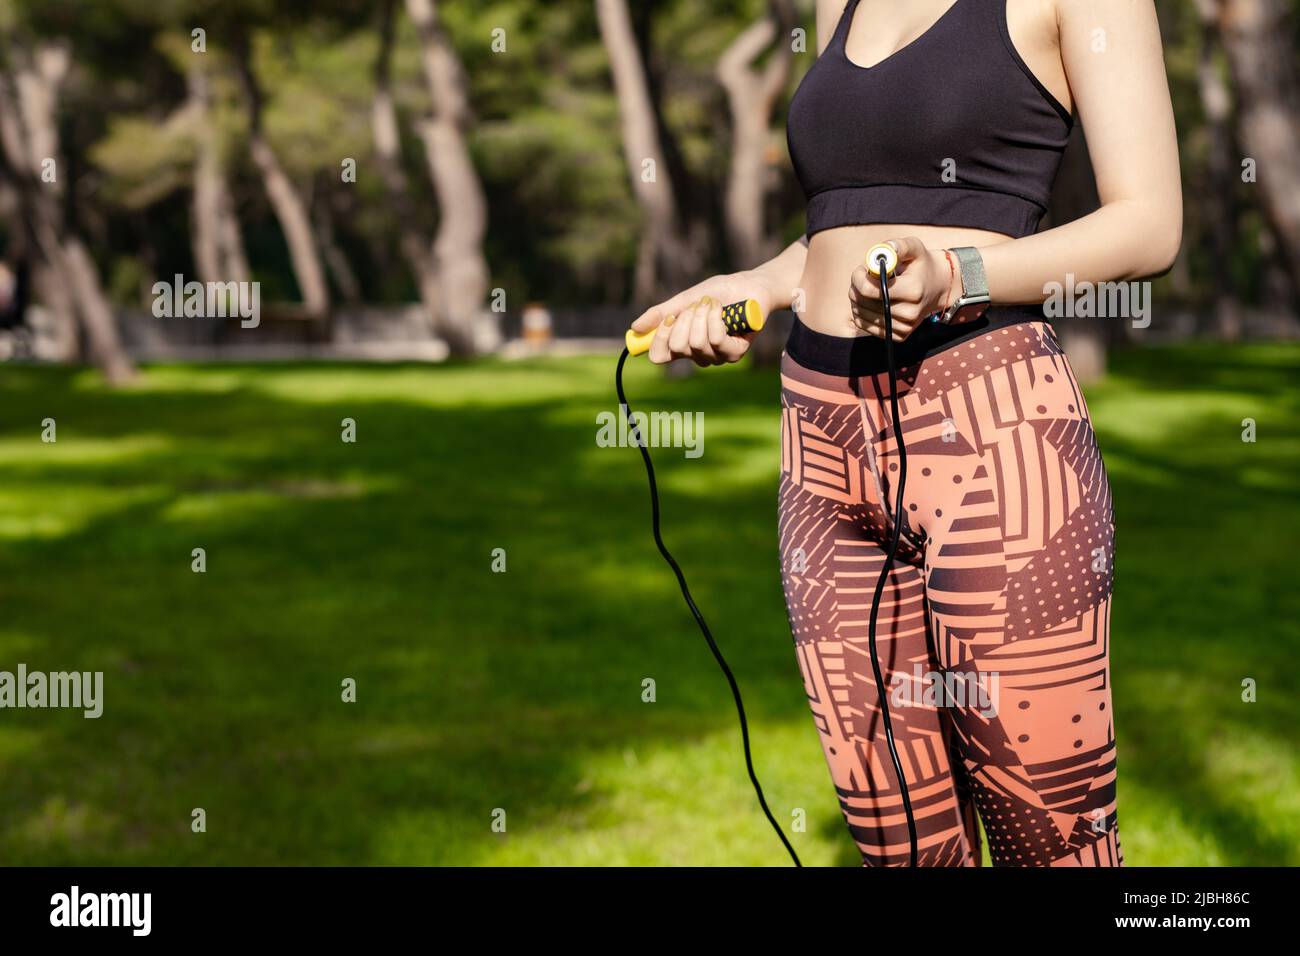 Beautiful redhead woman wearing black sports bra standing on city park,  outdoors flat stomach with a skipping rope in her hands at waist level.  Health Stock Photo - Alamy